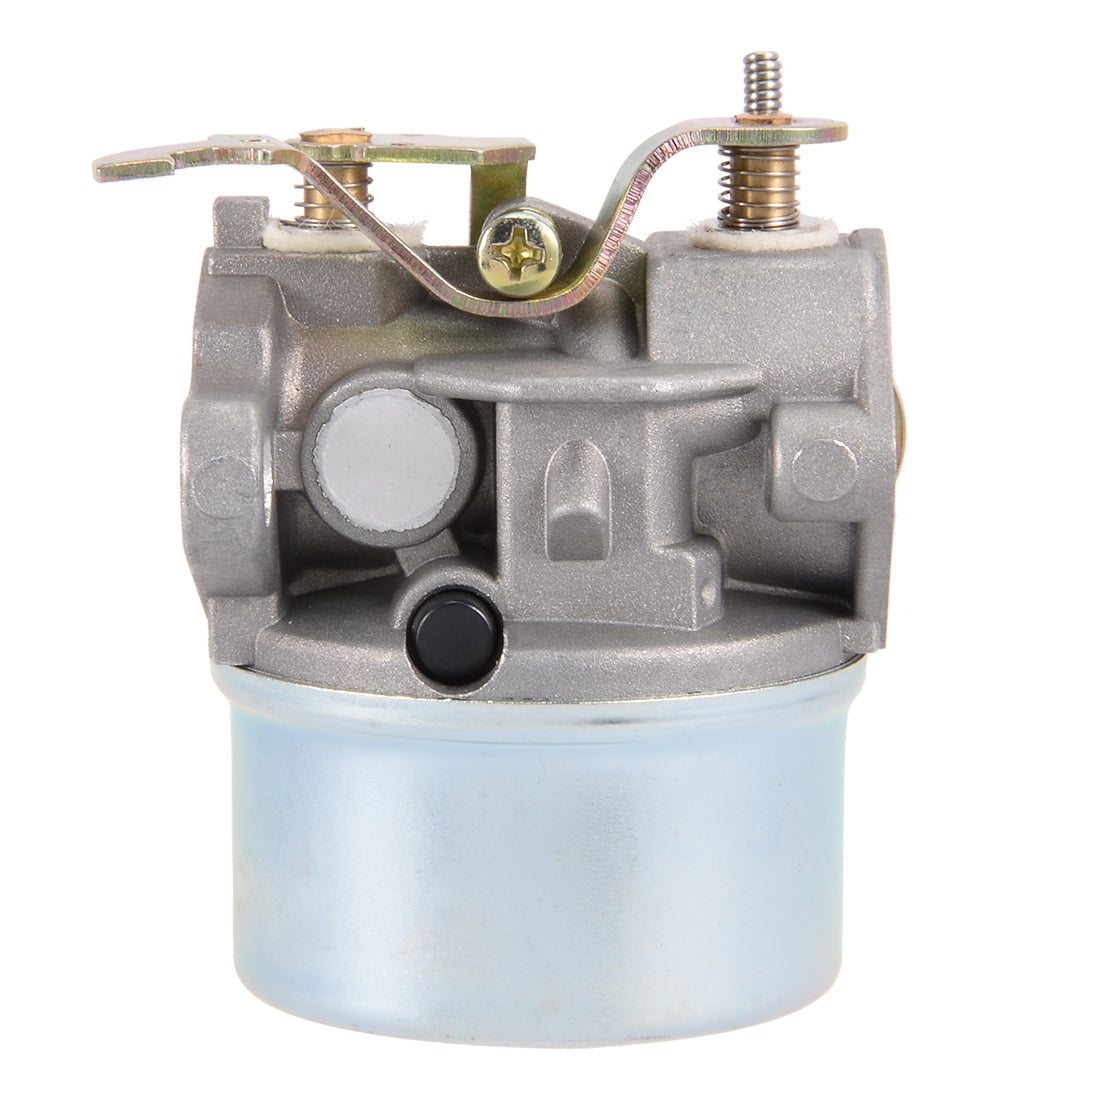 uxcell Uxcell 640305 Carburetor for Tecumseh Fits OH195EA OH195EP OH195XA OH195XP Engines with Gasket